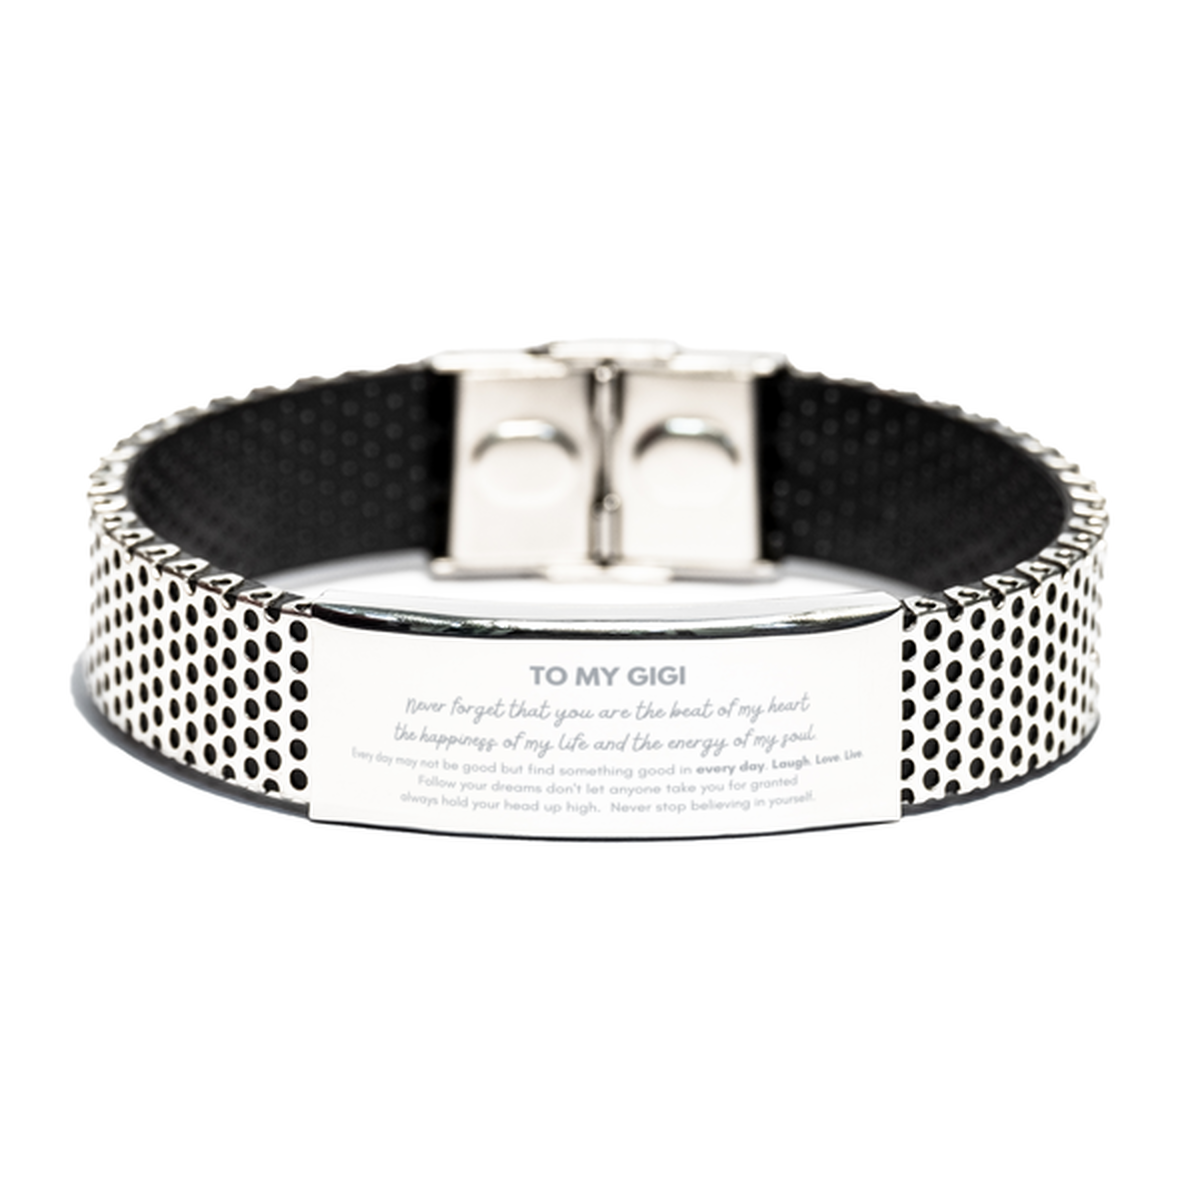 To My Gigi Bracelet Gifts, Christmas Gigi Stainless Steel Bracelet Present, Birthday Unique Motivational For Gigi, To My Gigi Never forget that you are the beat of my heart the happiness of my life and the energy of my soul